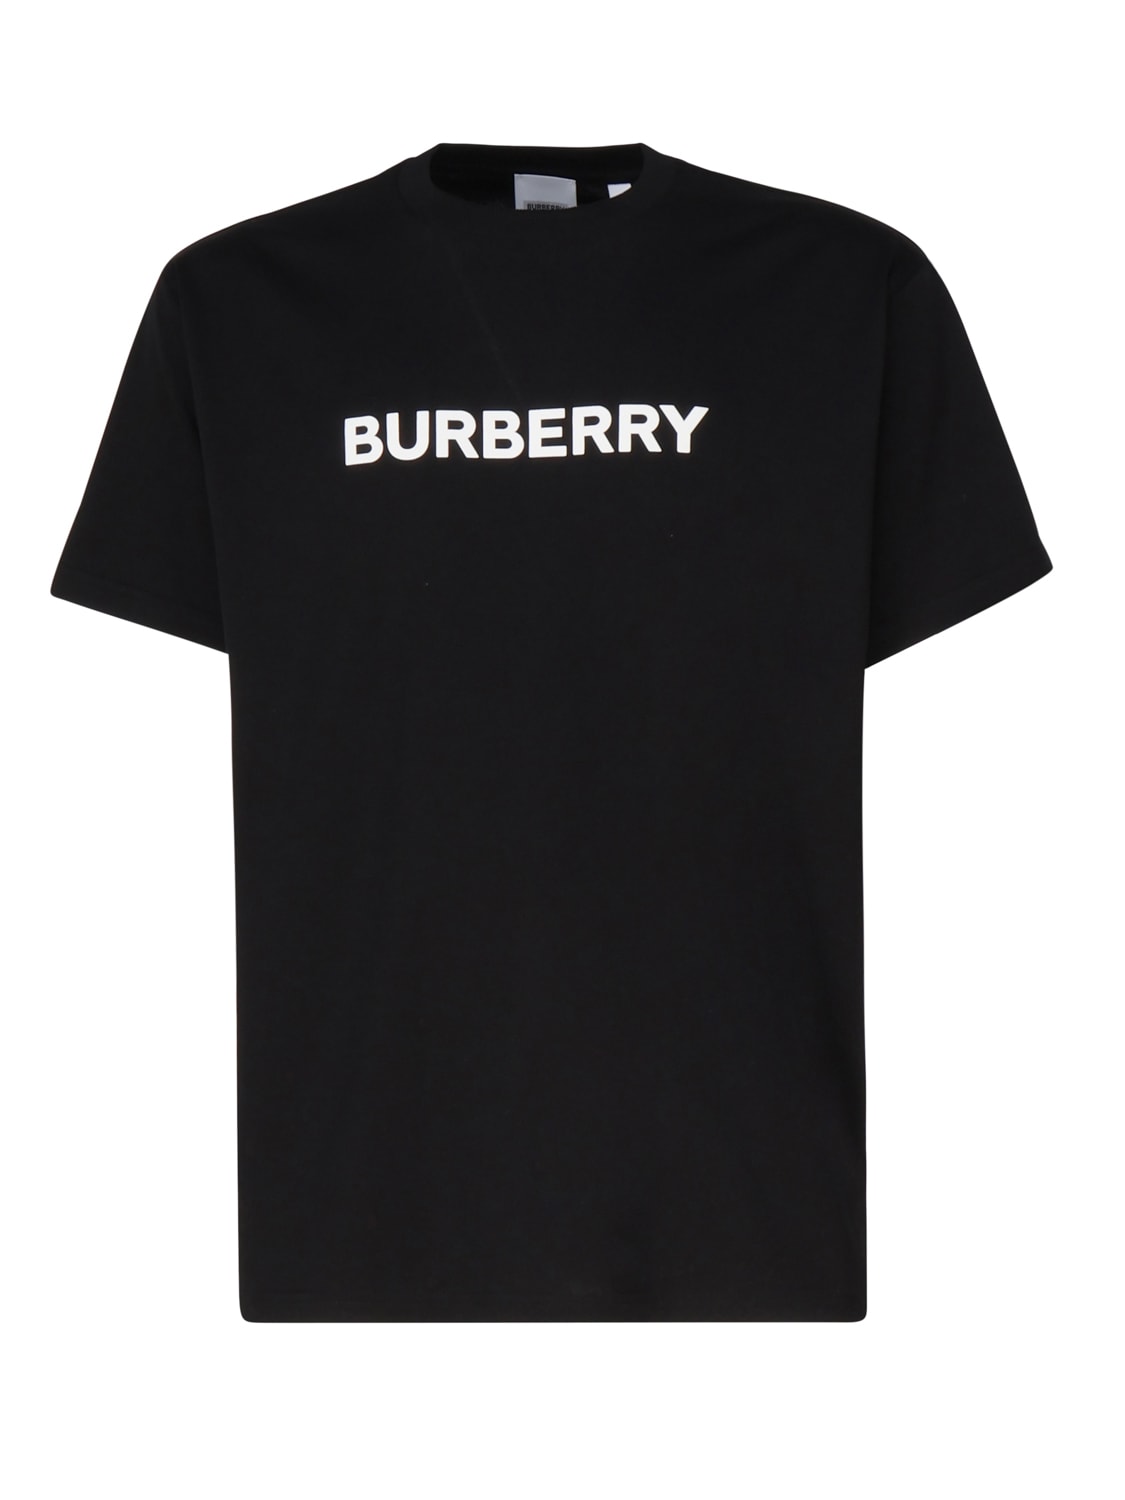 Burberry T-shirt With Print In Black